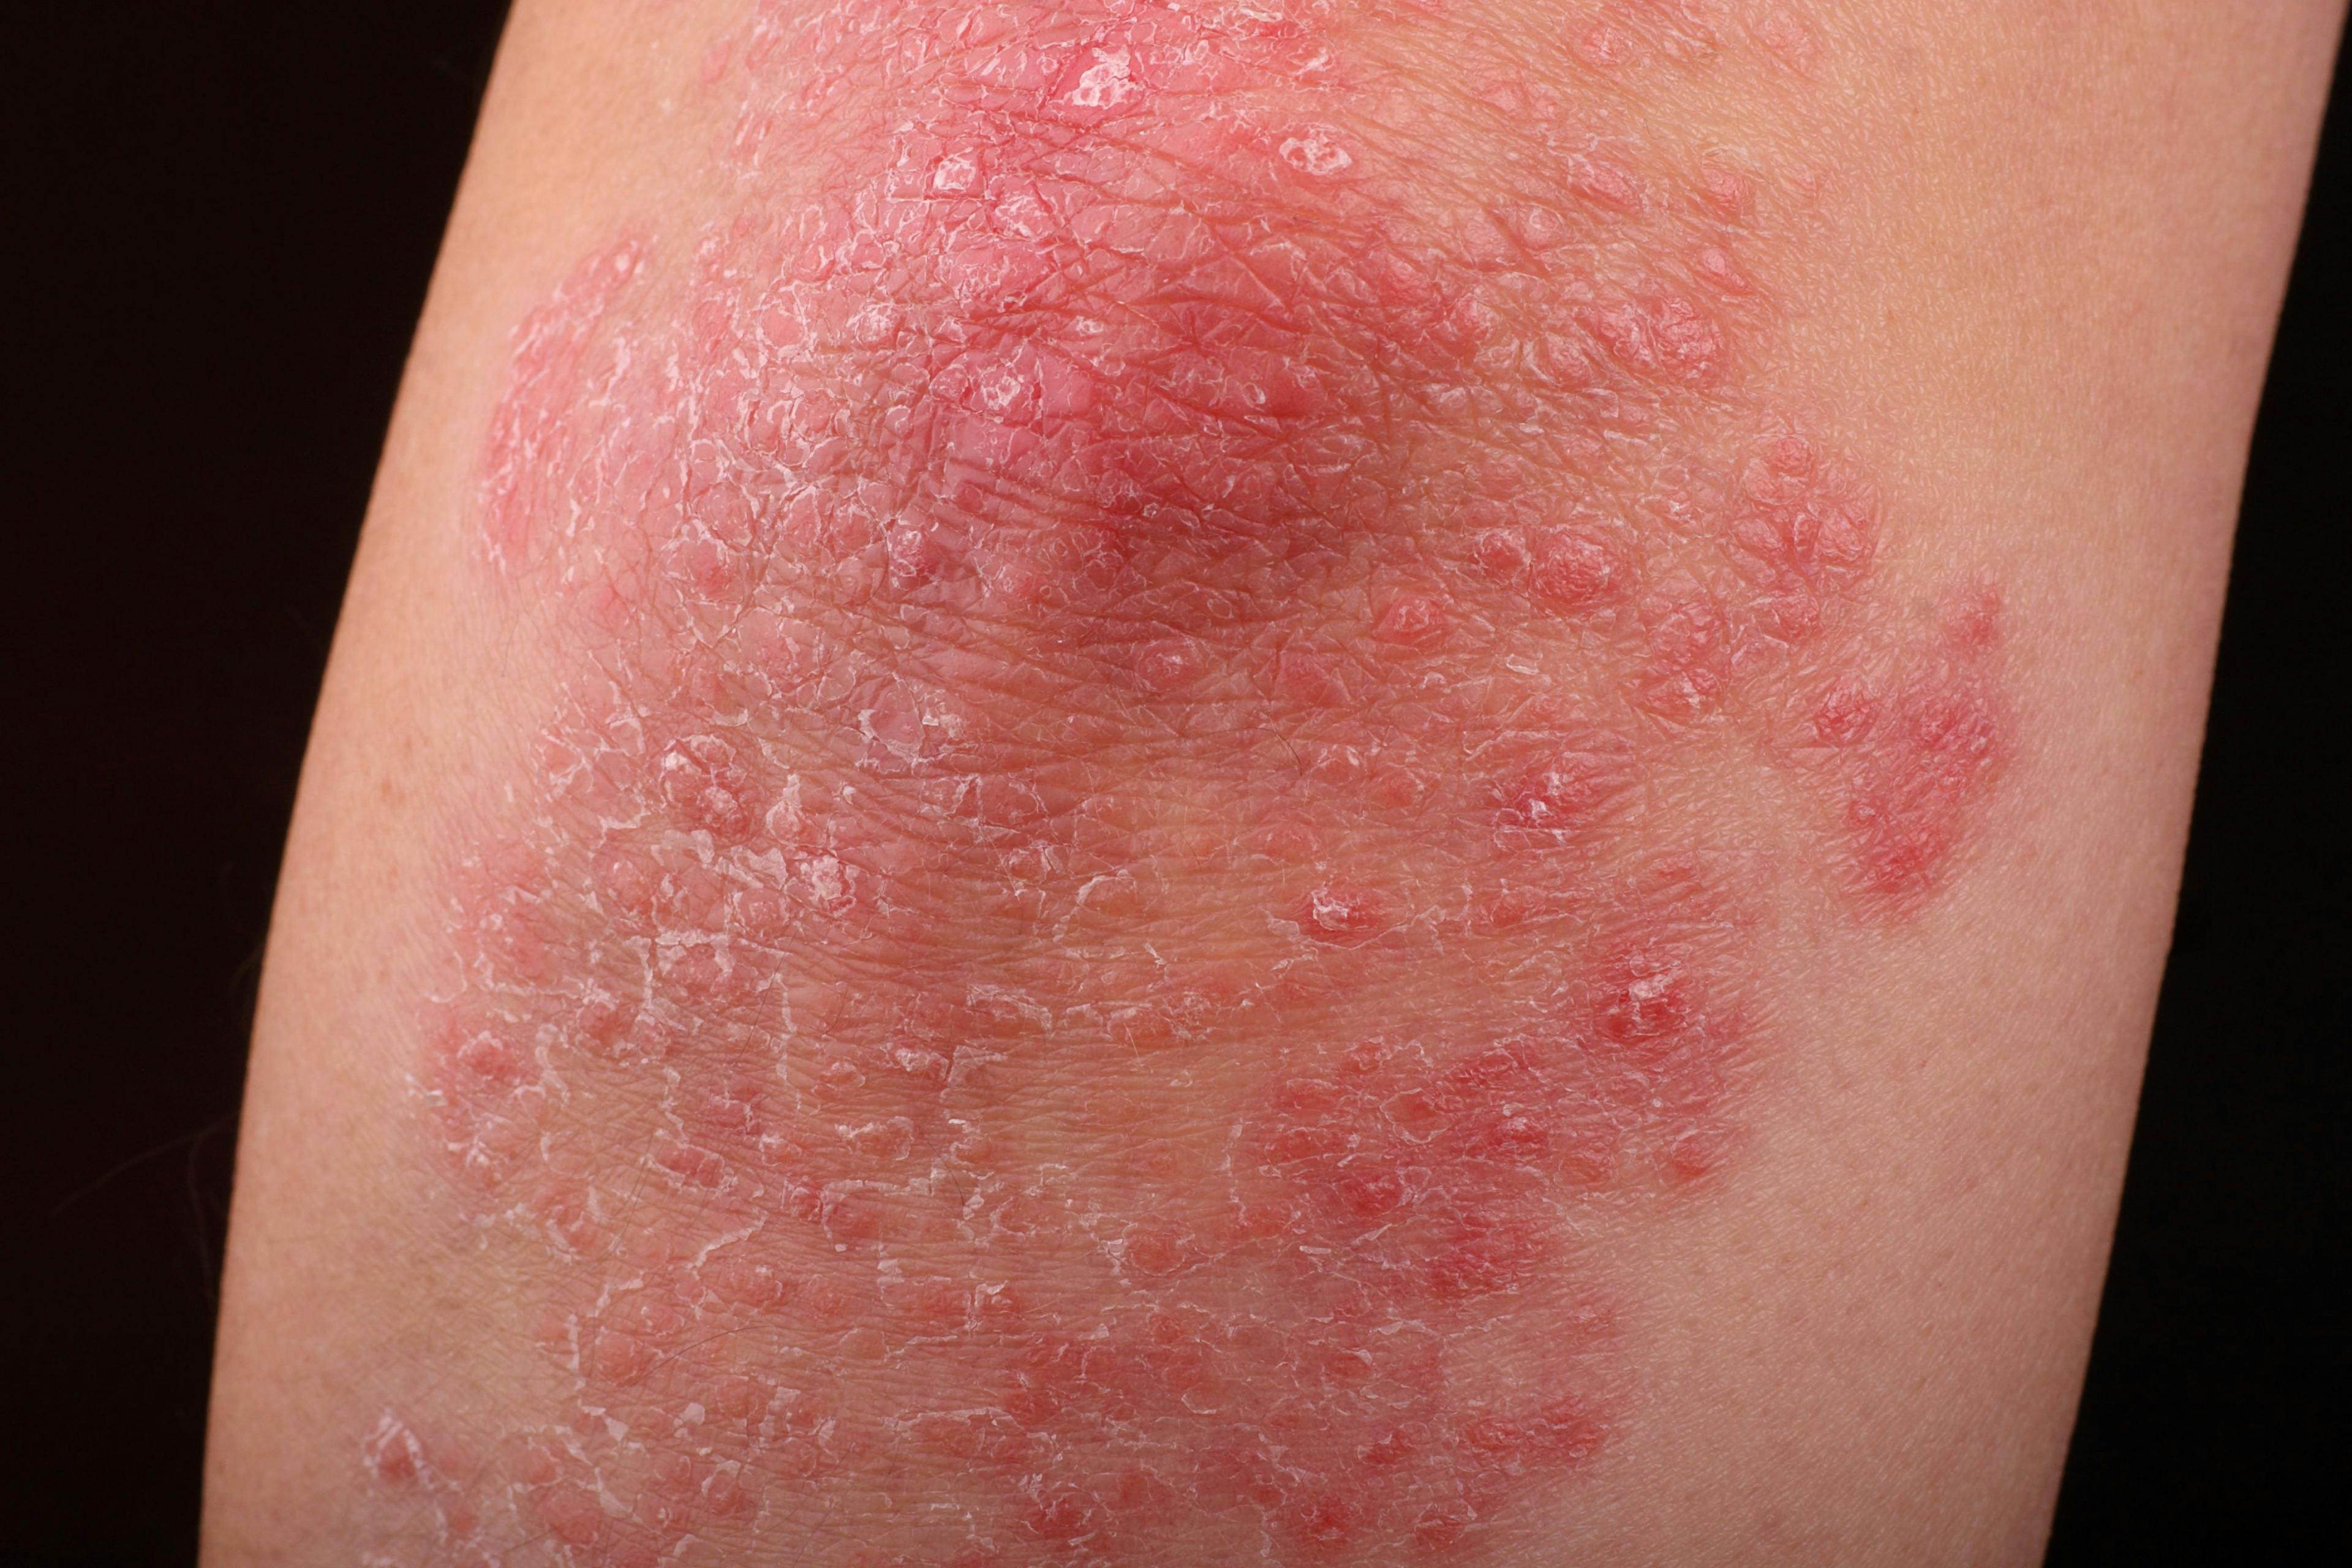 Safety Profile of Secukinumab Favorable for Pediatric Patients With Plaque Psoriasis